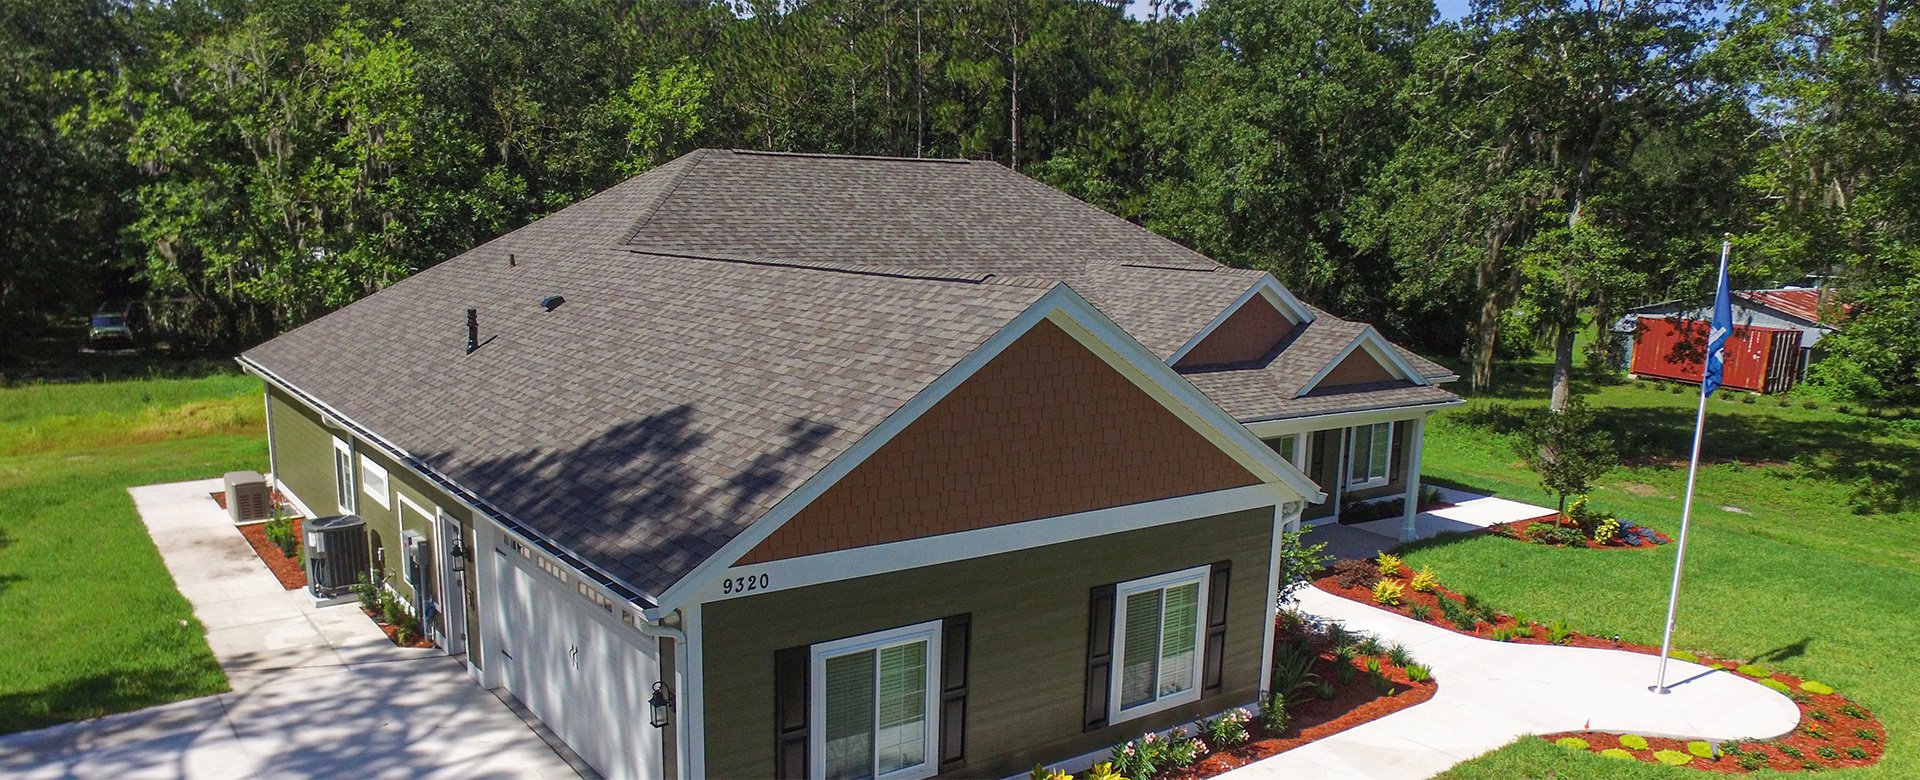 roof repair and rood replacement jacksonville fl